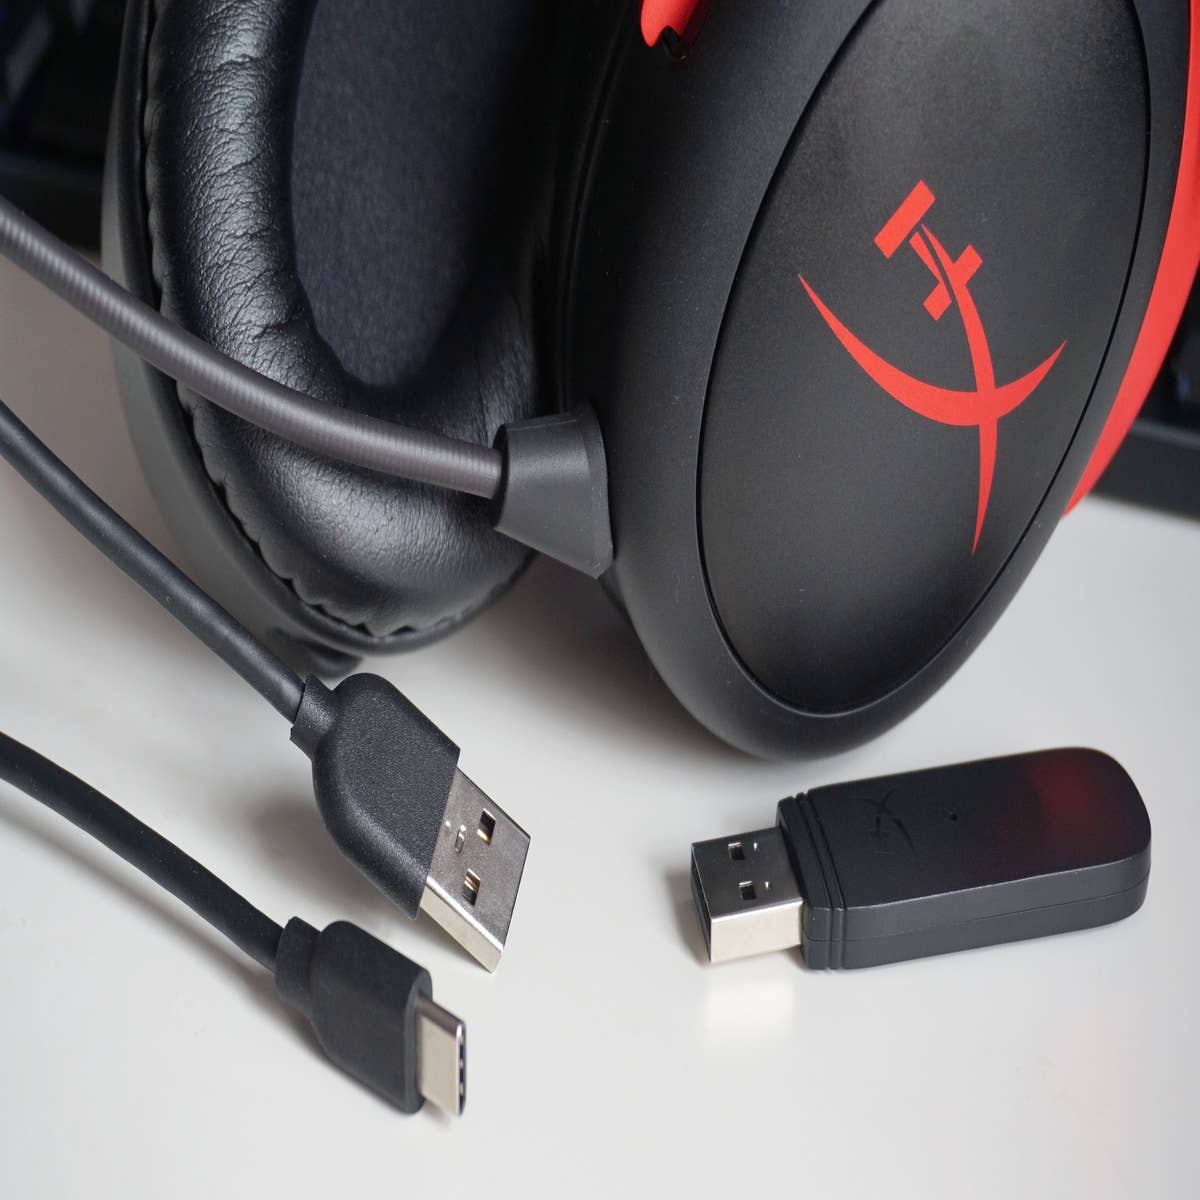 https://assetsio.gnwcdn.com/hyperx%20cloud%20ii%20wireless%20dongle%20and%20cable.jpg?width=1200&height=1200&fit=bounds&quality=70&format=jpg&auto=webp